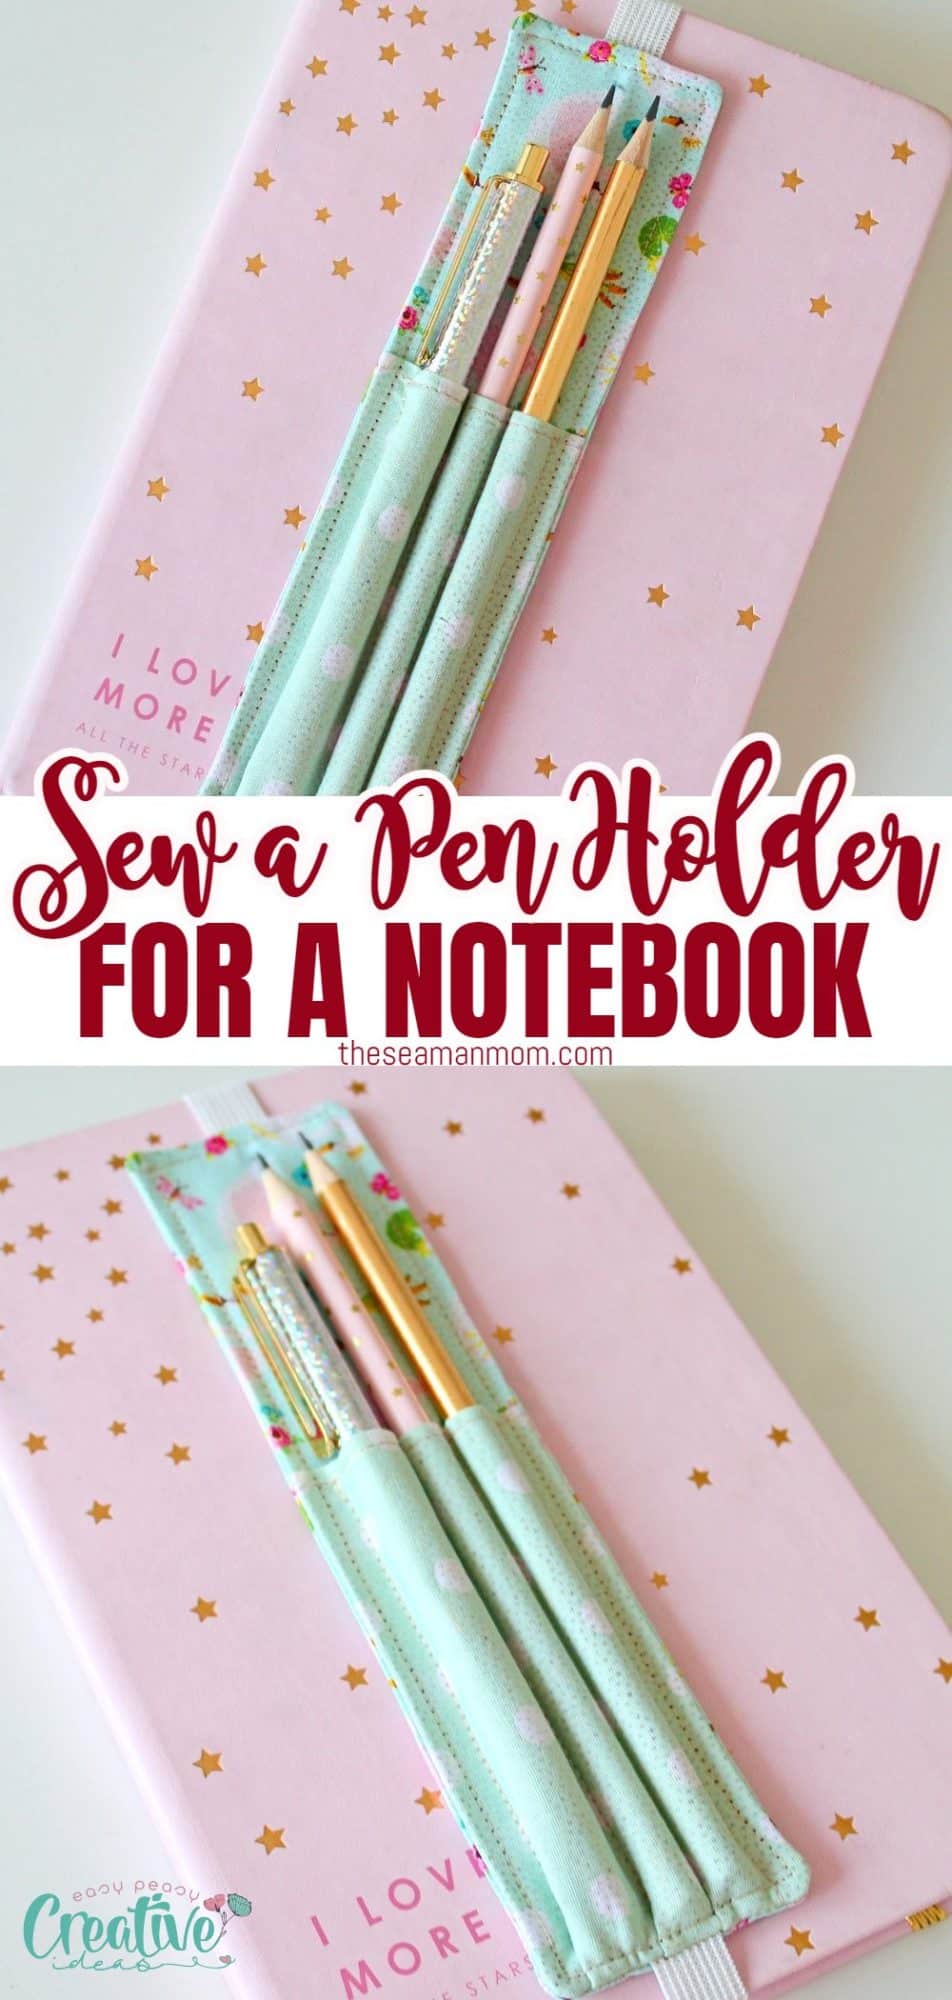 How to sew a DIY pen holder for a notebook